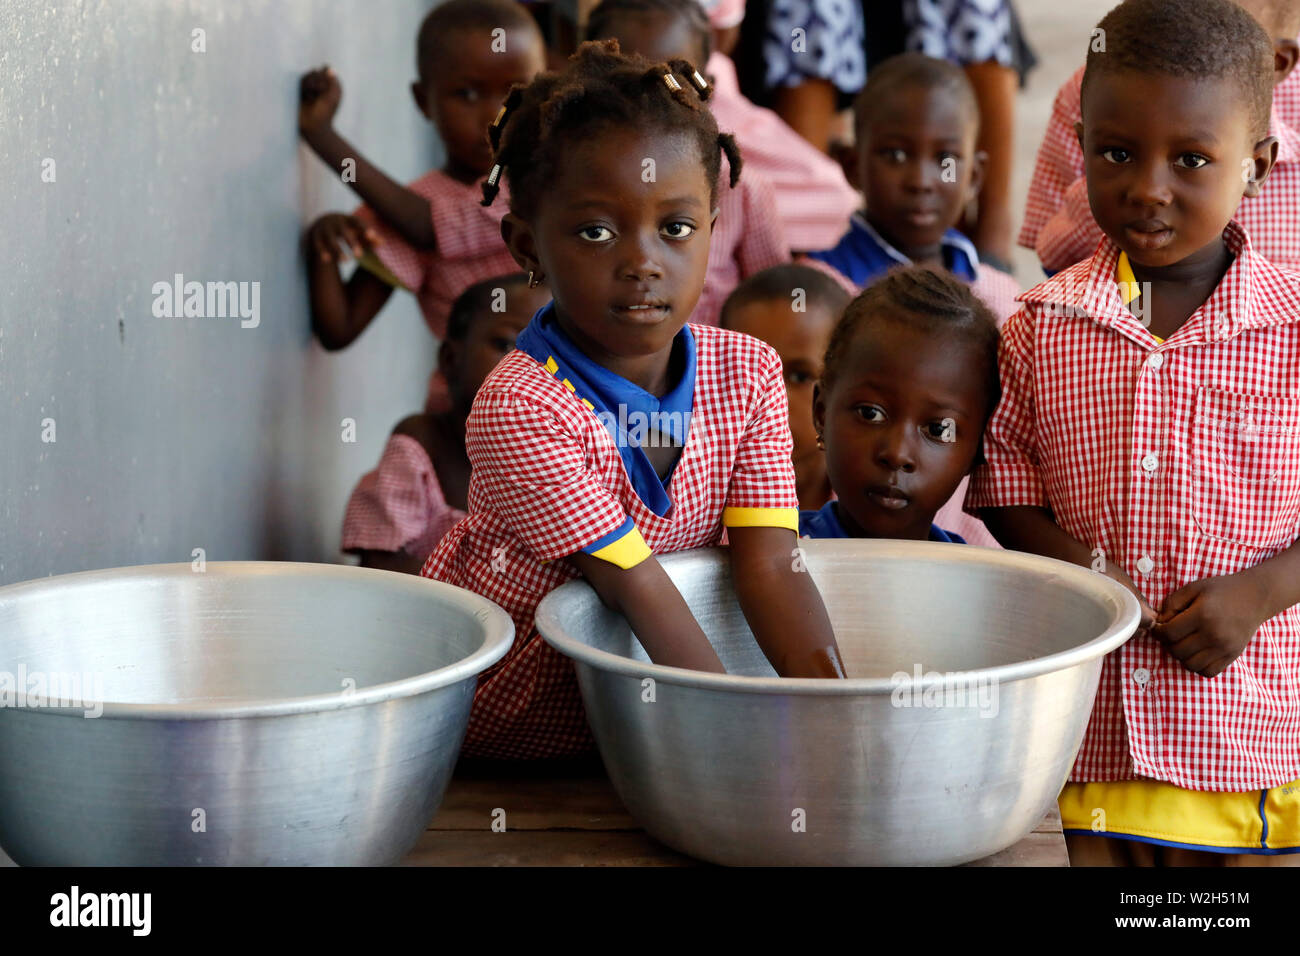 African primary school. A school girl washing his hands. Lome. Togo. Stock Photo